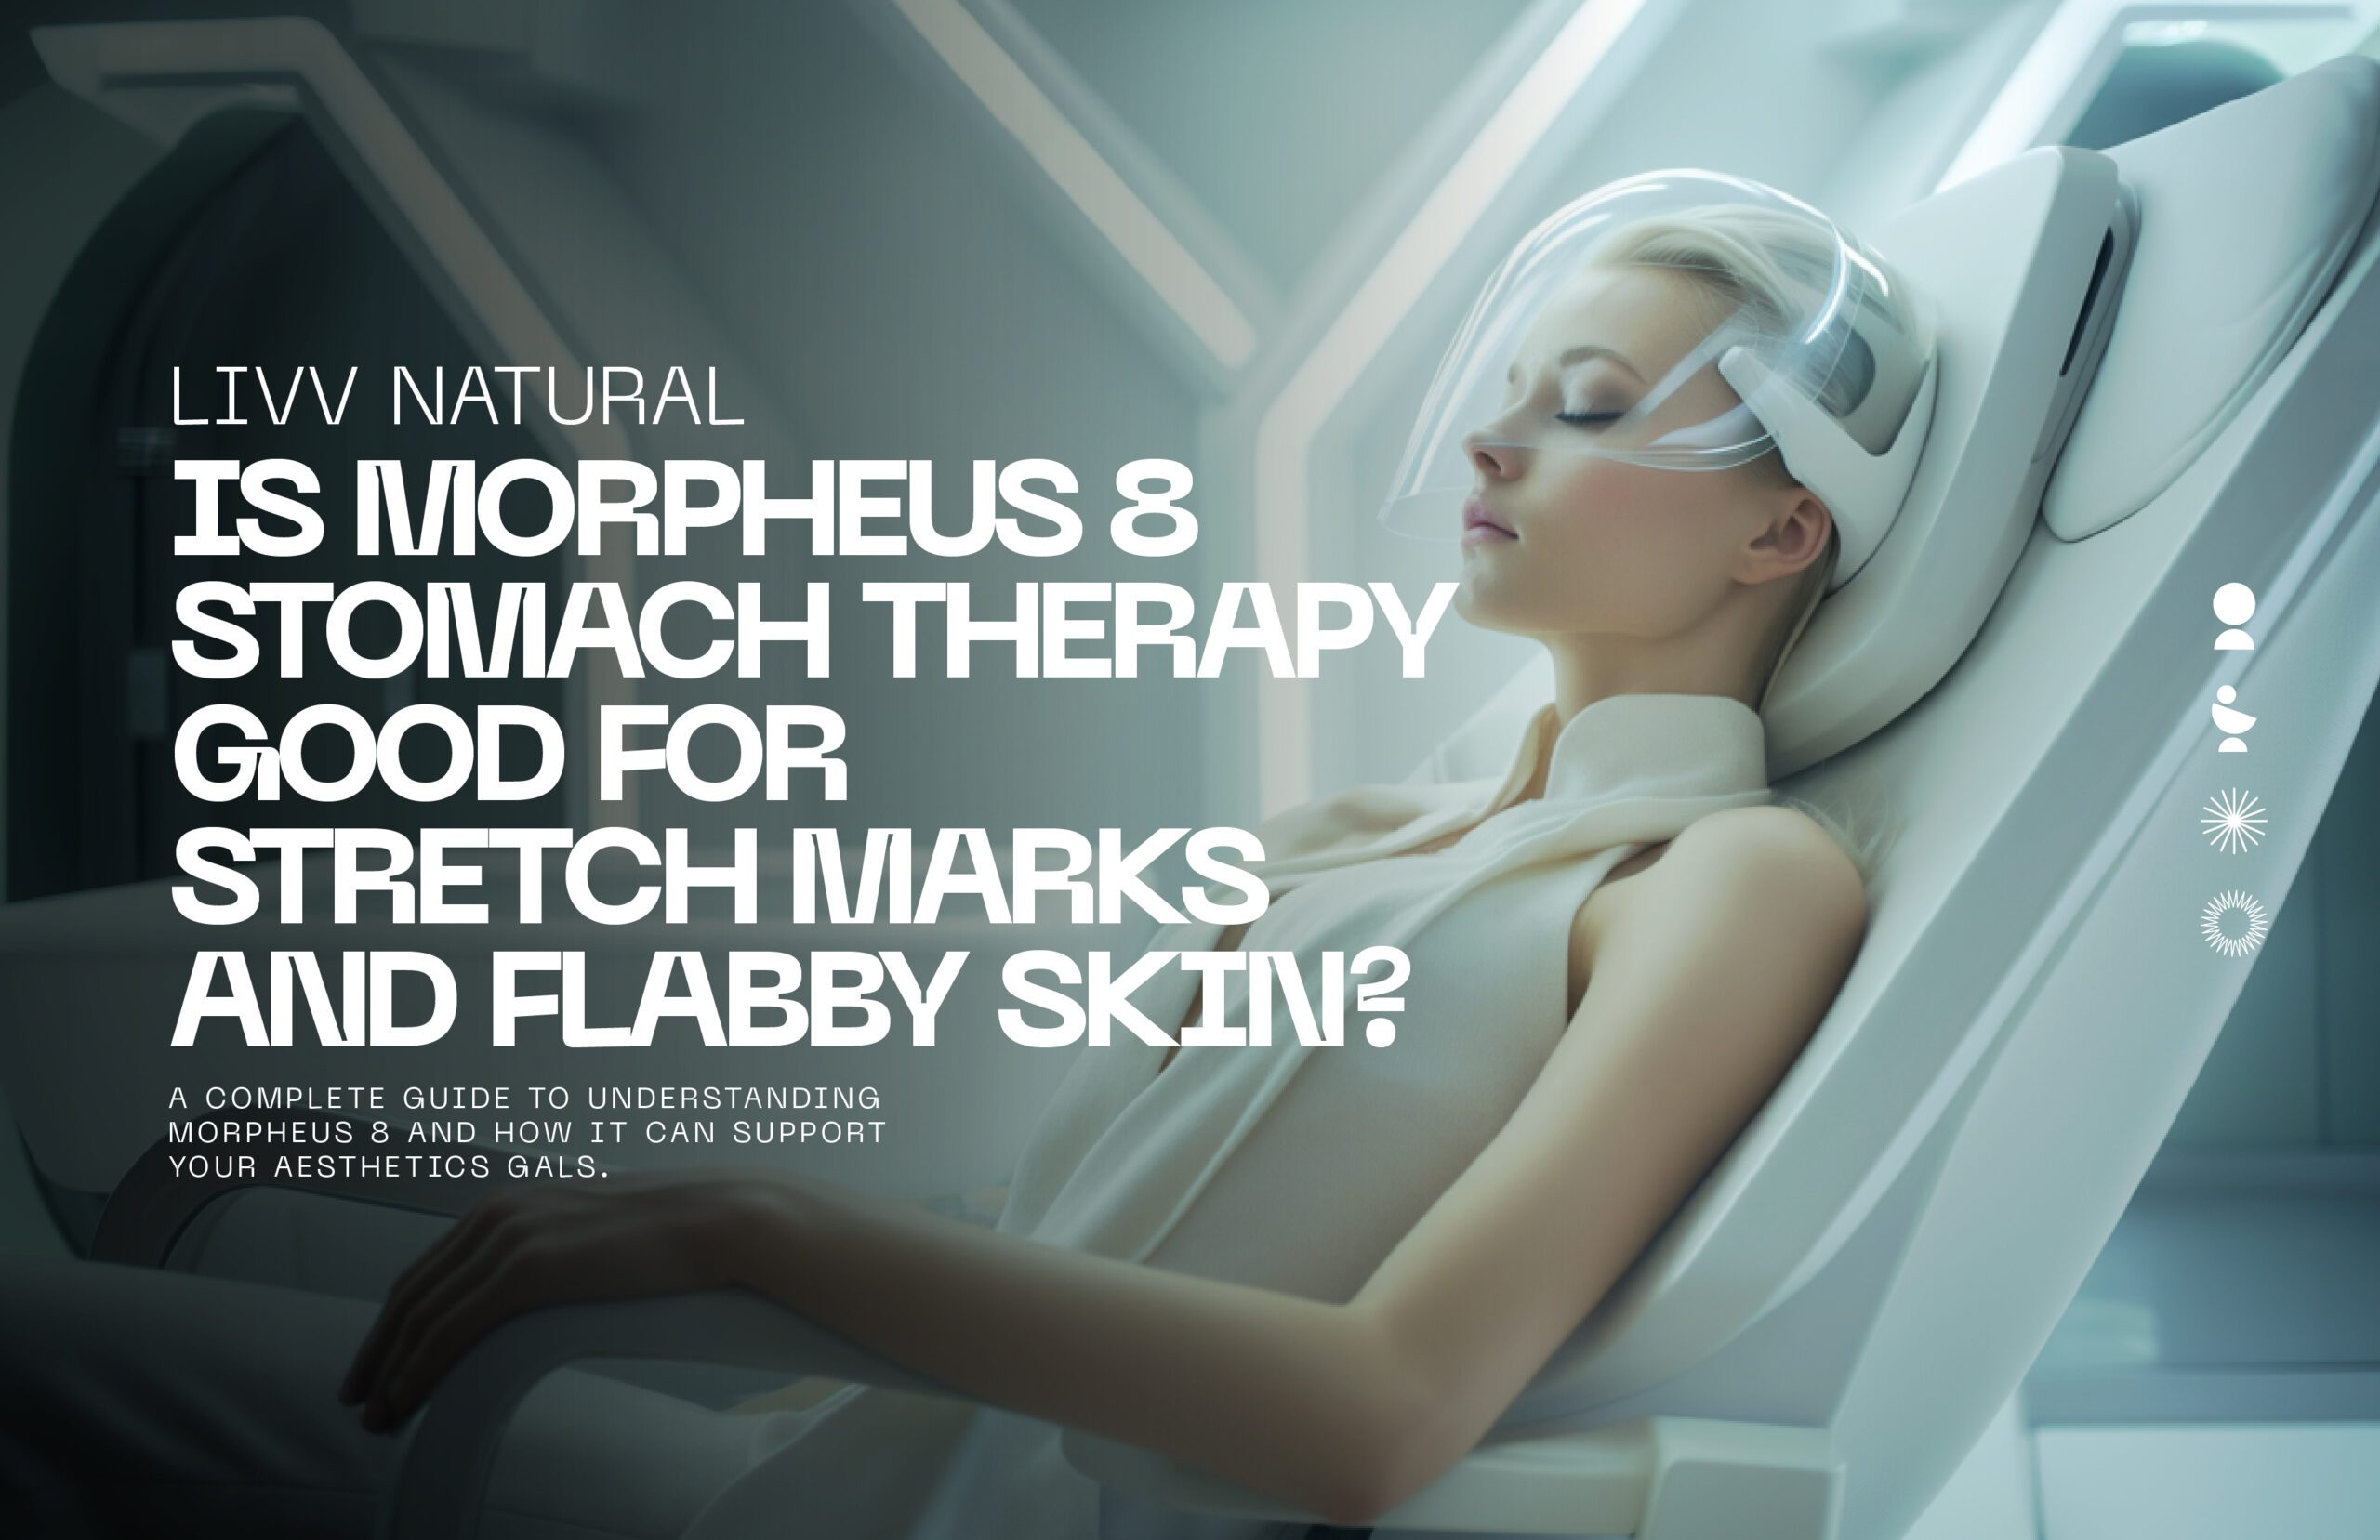 Morpheus body – good for stretch marks and flabby skin!?